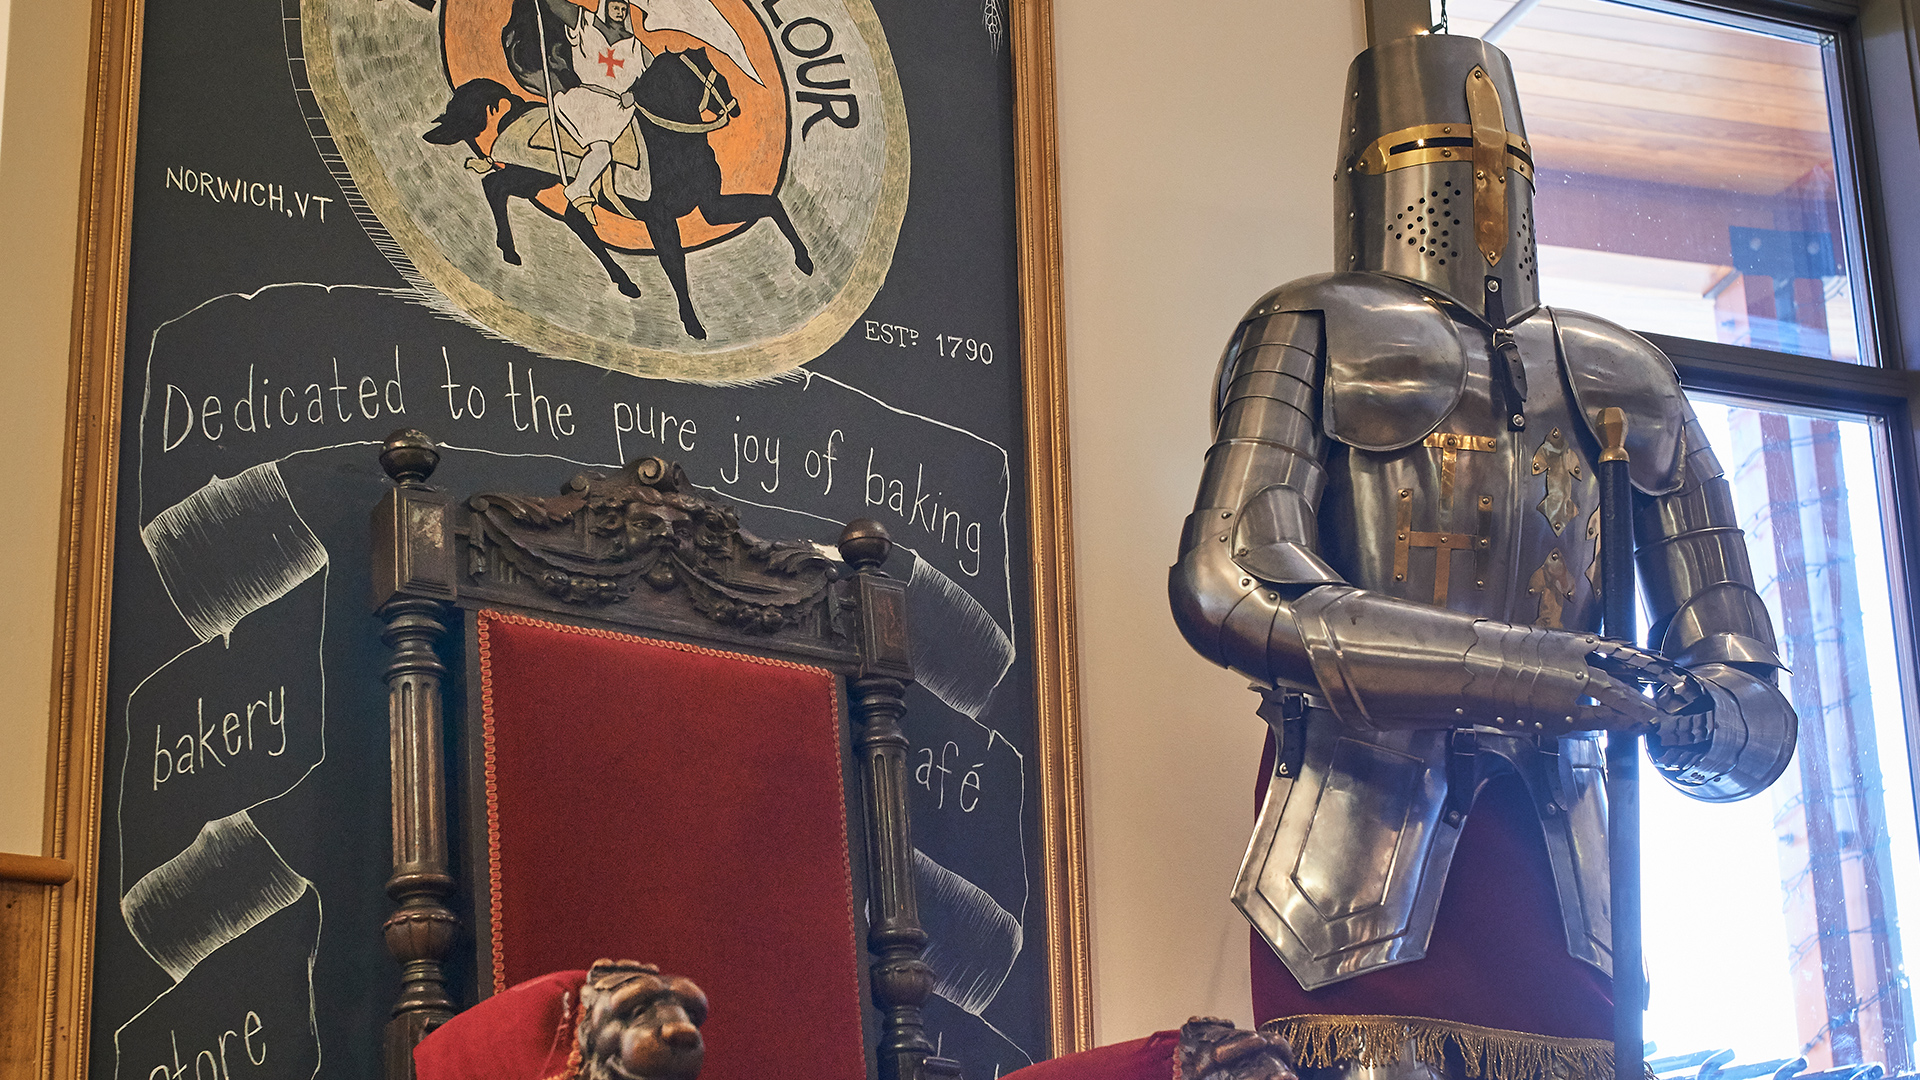 A throne and suit of armor from the King Arthur Flour cafe